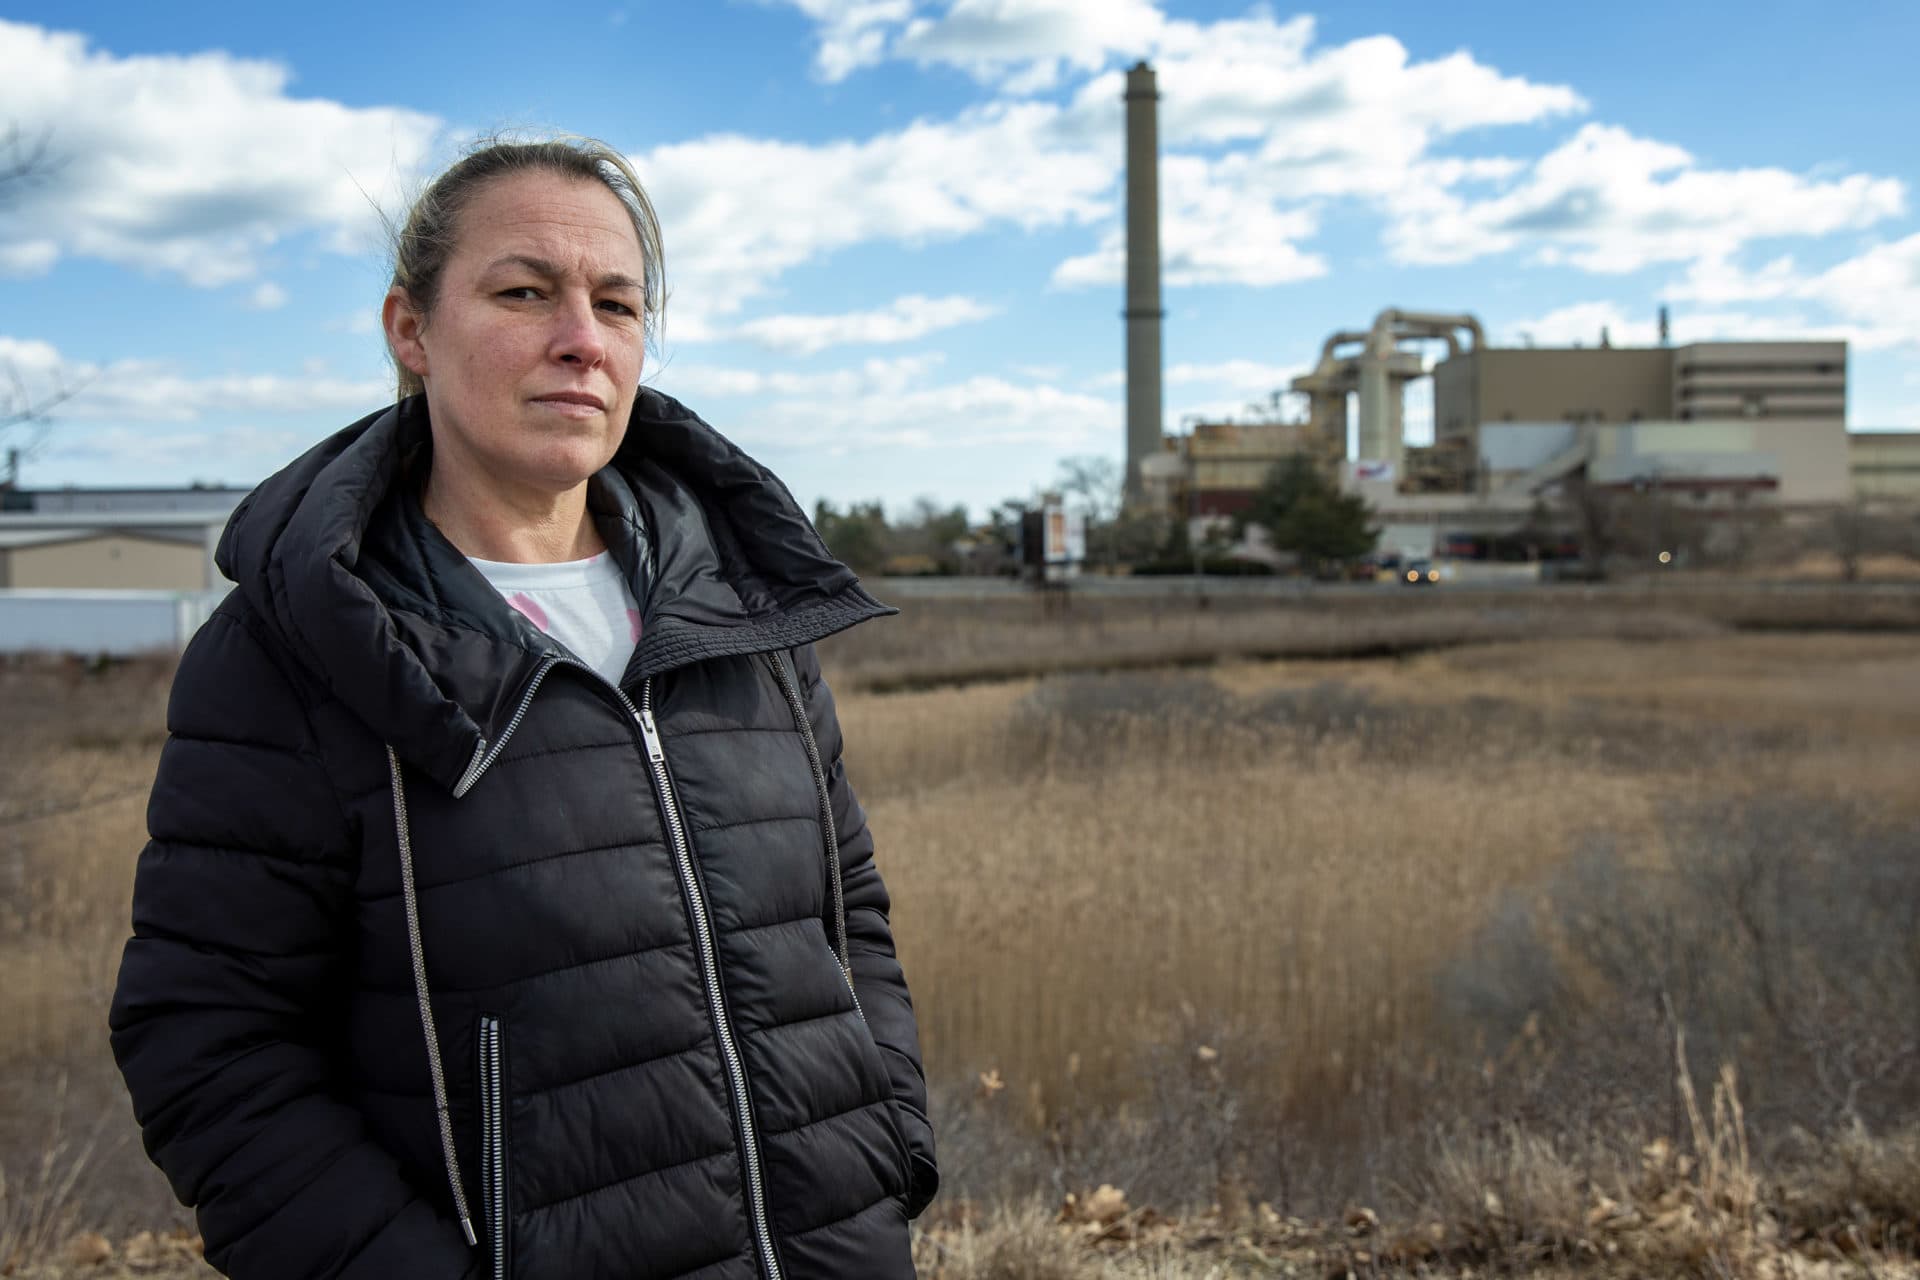 Jackie Mercurio, a Saugus resident and member of Alliance for Health and the Environment, stands in Rumney Marsh near the WIN Waste incinerator and landfill. (Credit: Robin Lubbock/WBUR)